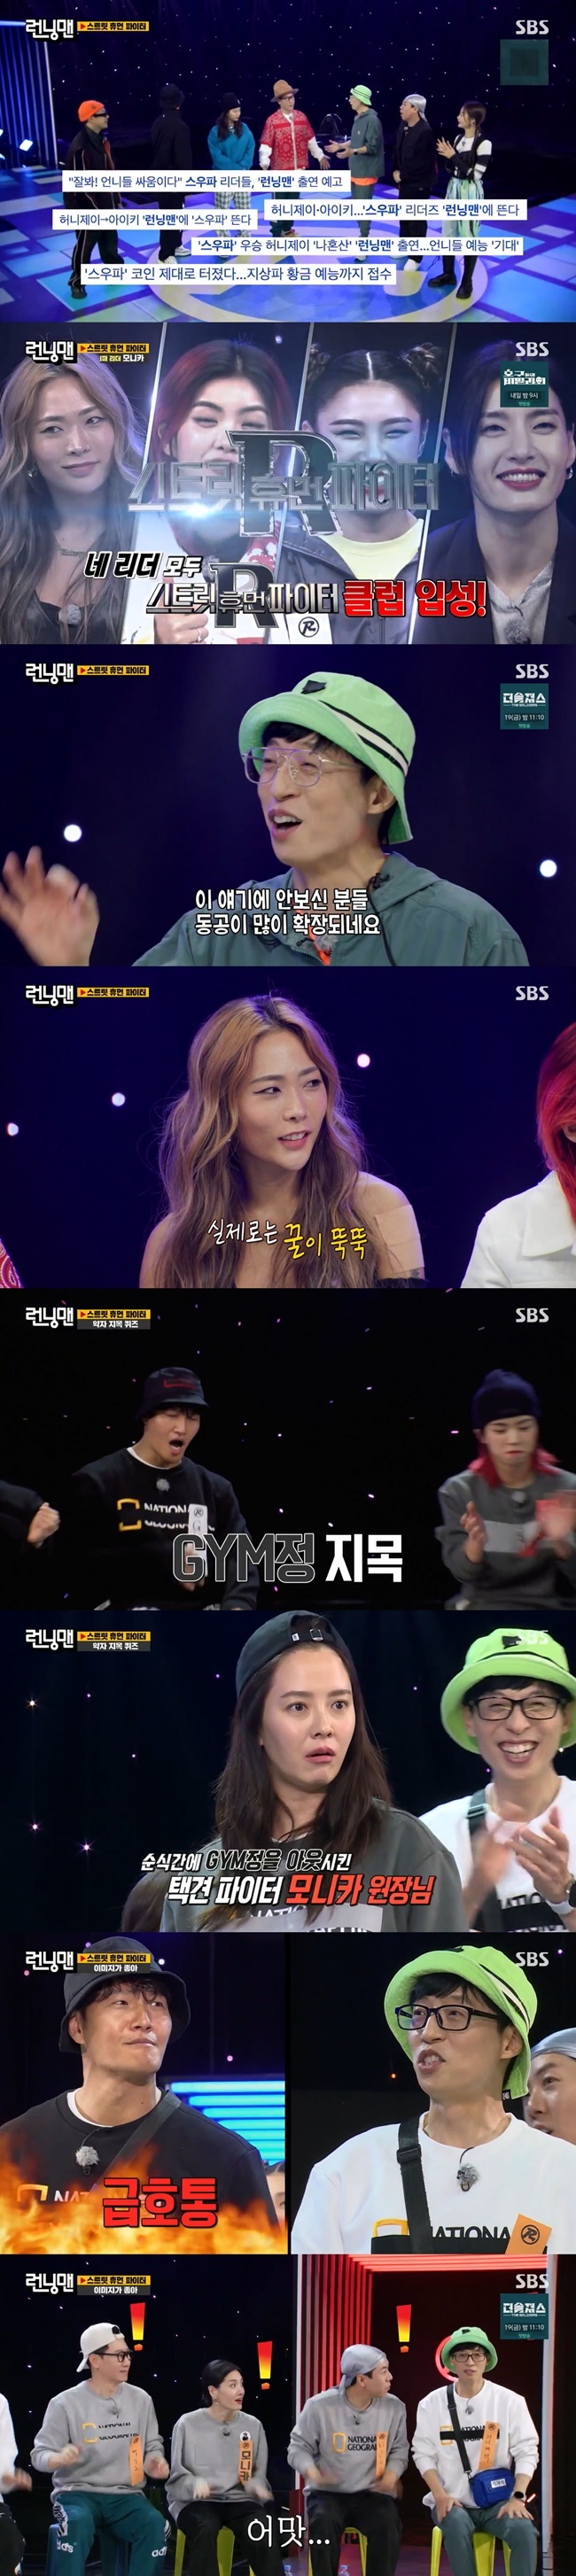 Monica mentioned Running Man love lines Kim Jong-kook and Song Ji-hyo.November On the 14th SBS Running Man, SUfa dancer featured Monica, Aiki, Lee Jung and honey Jay.On this day, Running Man and Mnet Street Woman The Fighter met and were decorated with Street Human The Fighter.Im telling you honestly, some people have not seen SUfa here, and some people have not seen Squid Games because its such a craze, Yoo Jae-Suk said.Haha said, Some people are contacted for a week if you send a katok.Then, Street Human The Fighter Race was decorated; 4 Crewe was formed around four leaders, and at the end of each mission, 3rd and 4th Crewe went through a dance battle.Last-place Crewe gets penalty placement and affects final rankBefore the start of the first mission, honey jay retired early due to a conditional difficulty, Yoo Jae-Suk was scattered to Monica Crewe and Jeon So-min to Aiki Crewe.The first mission was to identify the weak and to solve the problem by pointing out the weak.While the quiz is underway, Yoo Jae-Suk revealed, Now Aiki and Ji Hyo do not even have a mouth.Among them, Monica pointed out Kim Jong-kook and Song Ji-hyo, saying, I will try to disturb you because you two have a thumb.In the following name tag tearing, Monica succeeded in ripping Kim Jong-kooks name tag instead of Song Ji-hyo.Yoo Jae-Suk said, Ji Hyo does not intend to tear (Kim Jong-kook Name tag)?The second mission was I like the image. If the member who corresponds to the image that the other party points to does not overlap with other members, it is a winning method.Yang Se-chan shouted two beggars, and Haha and Aiki answered at the same time and laughed.Also, when Aiki shouted Goza three, there was a struggle between the members, and Ji Suk-jin and Yang Se-chan finally answered at the same time and self-destructed.The final result was Monica Crewe in first place, Aiki Crewe in last place; Aiki Crewe Song Ji-hyo, Jeon So-min and Aiki won the Random Wine Cream Cannon.Aiki laughed, saying, I was so happy today, but it was so much that I was like this at the end.